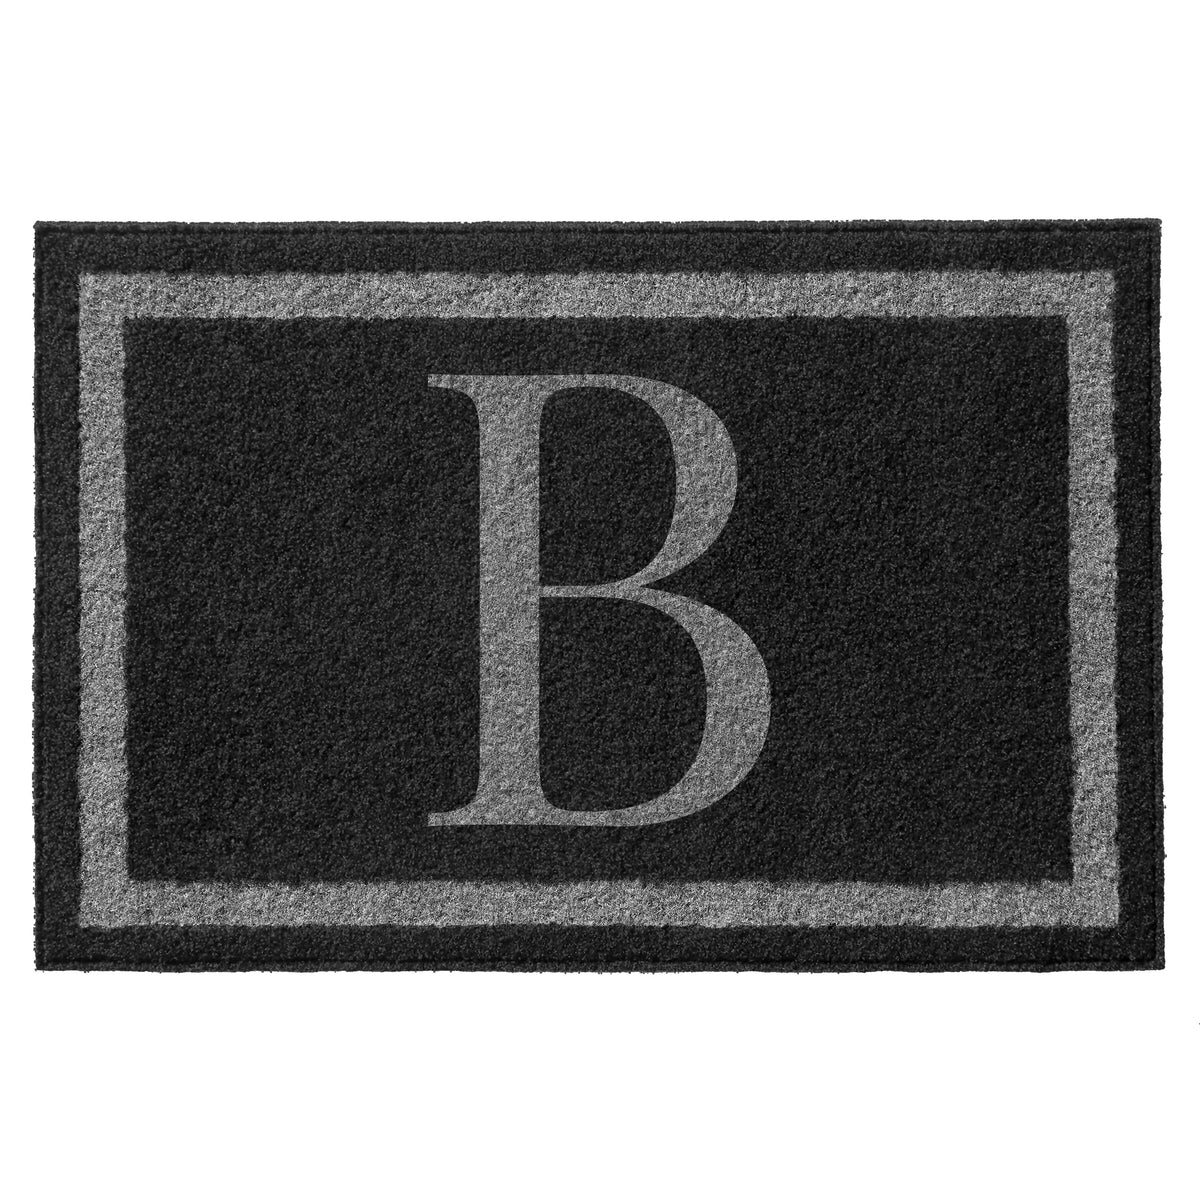 Infinity Custom Mats™ All-Weather Personalized Door Mat - STYLE: FARMHOUSE MONOGRAM COLOR: BLACK / GREY - rugsthatfit.com